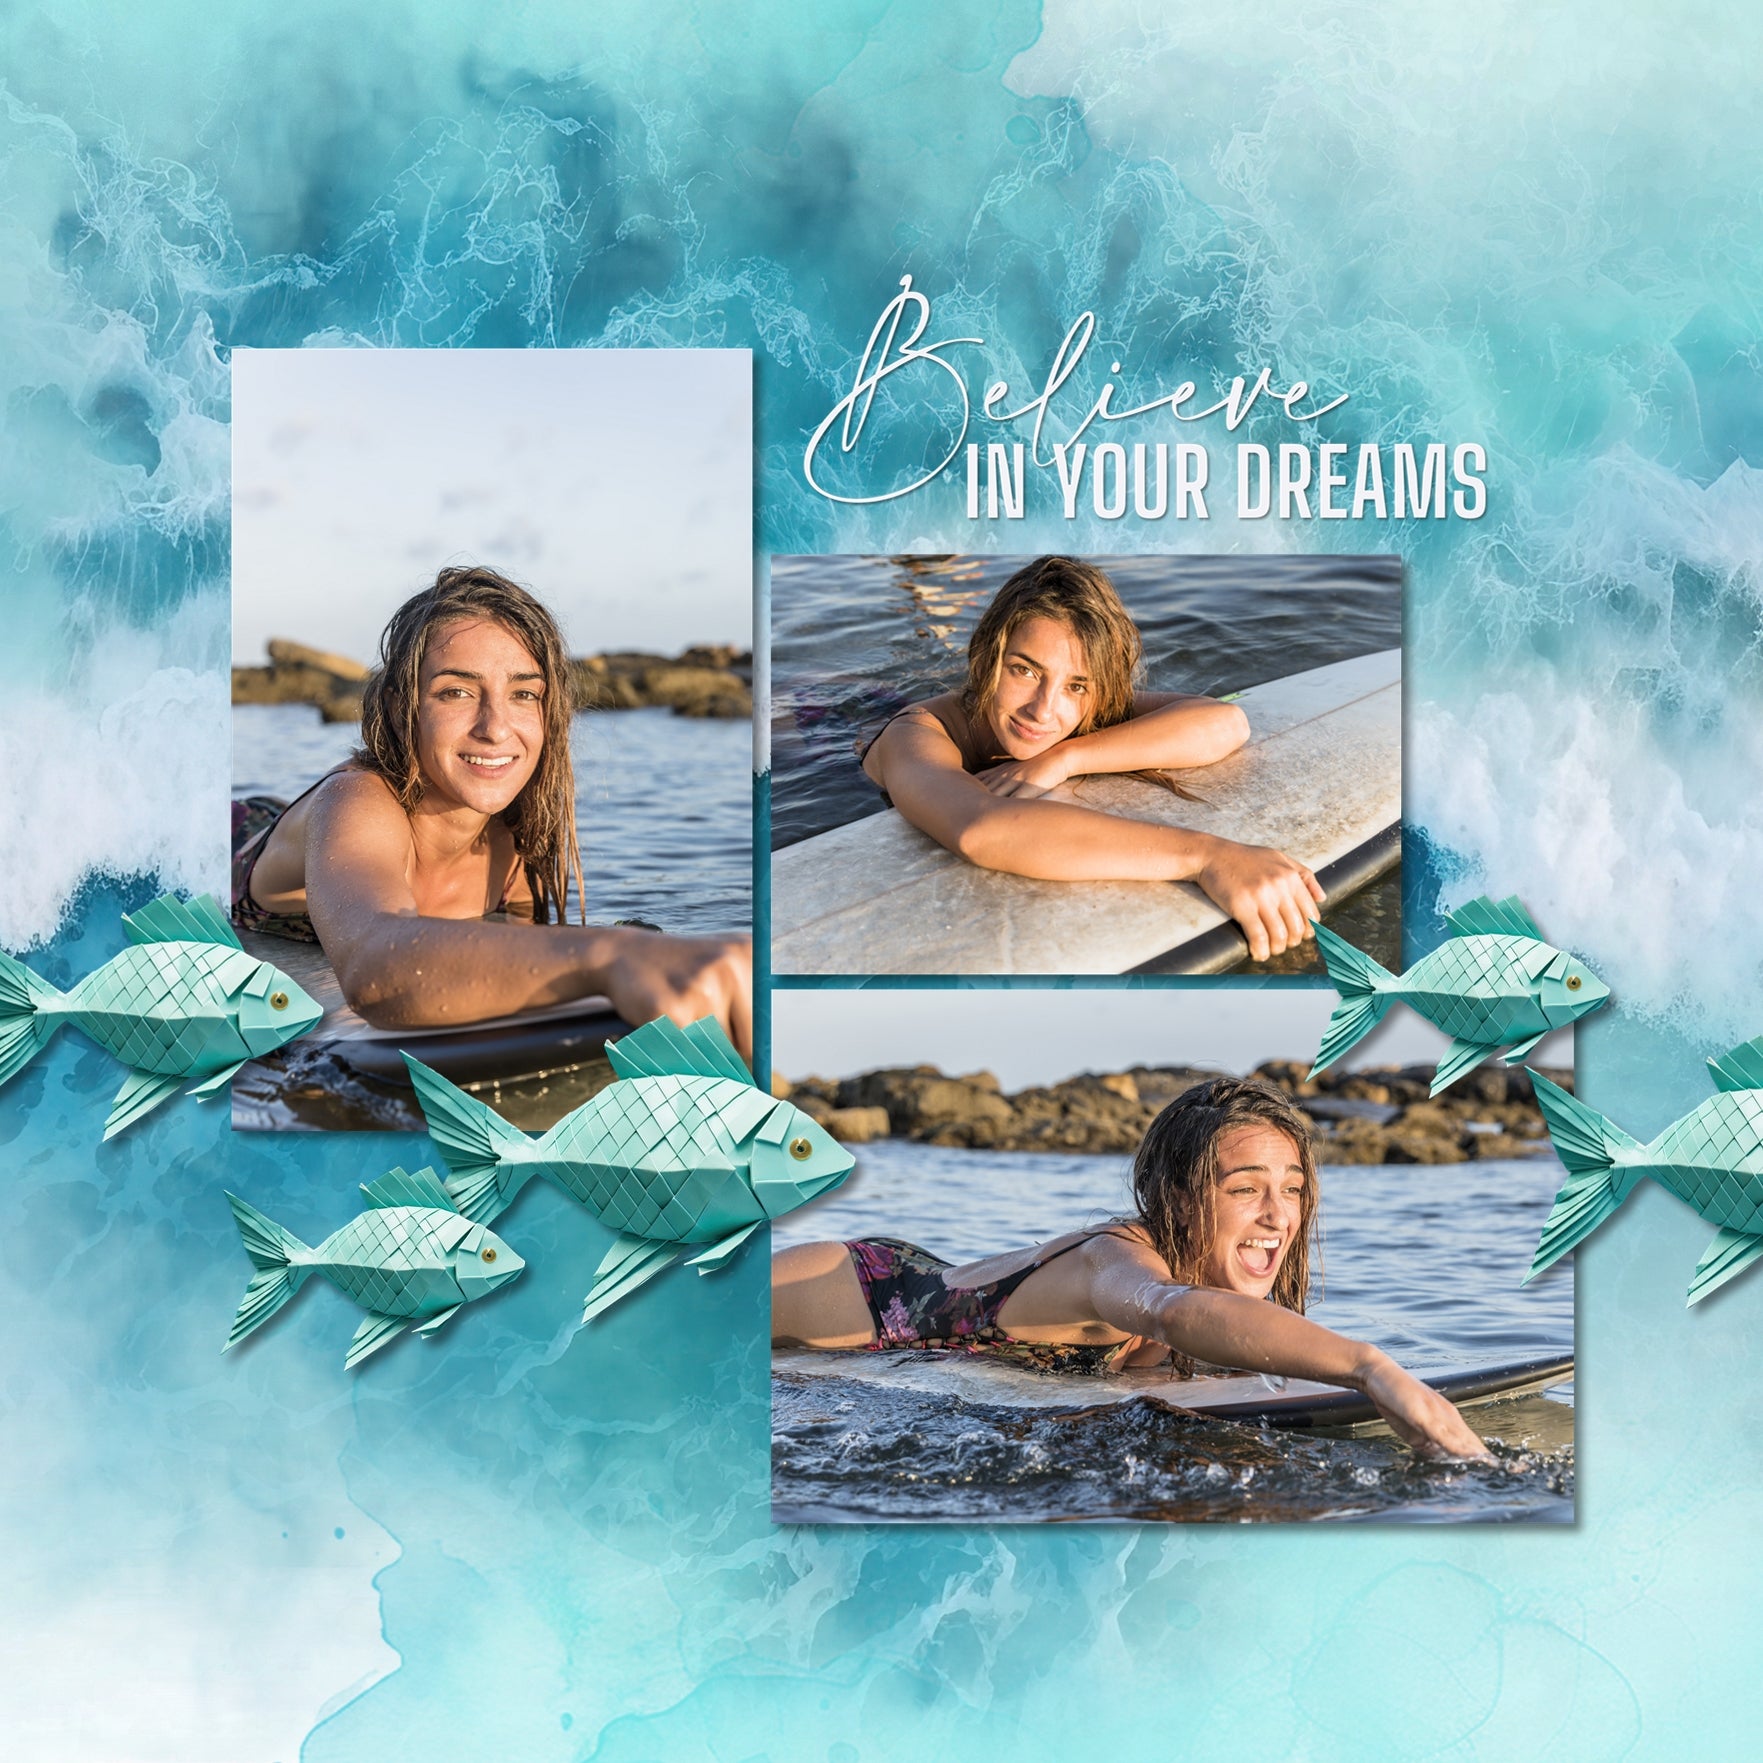 Summer beach days are here! Capture all your beach memories with this realistic digital scrapbooking bundle featuring elements, watercolor papers, watercolor splashes, an ocean filled alpha set, and stunning edge to edge masked overlays by Lucky Girl Creative digital art. Great for layering with your favorite tropical vacation photos.